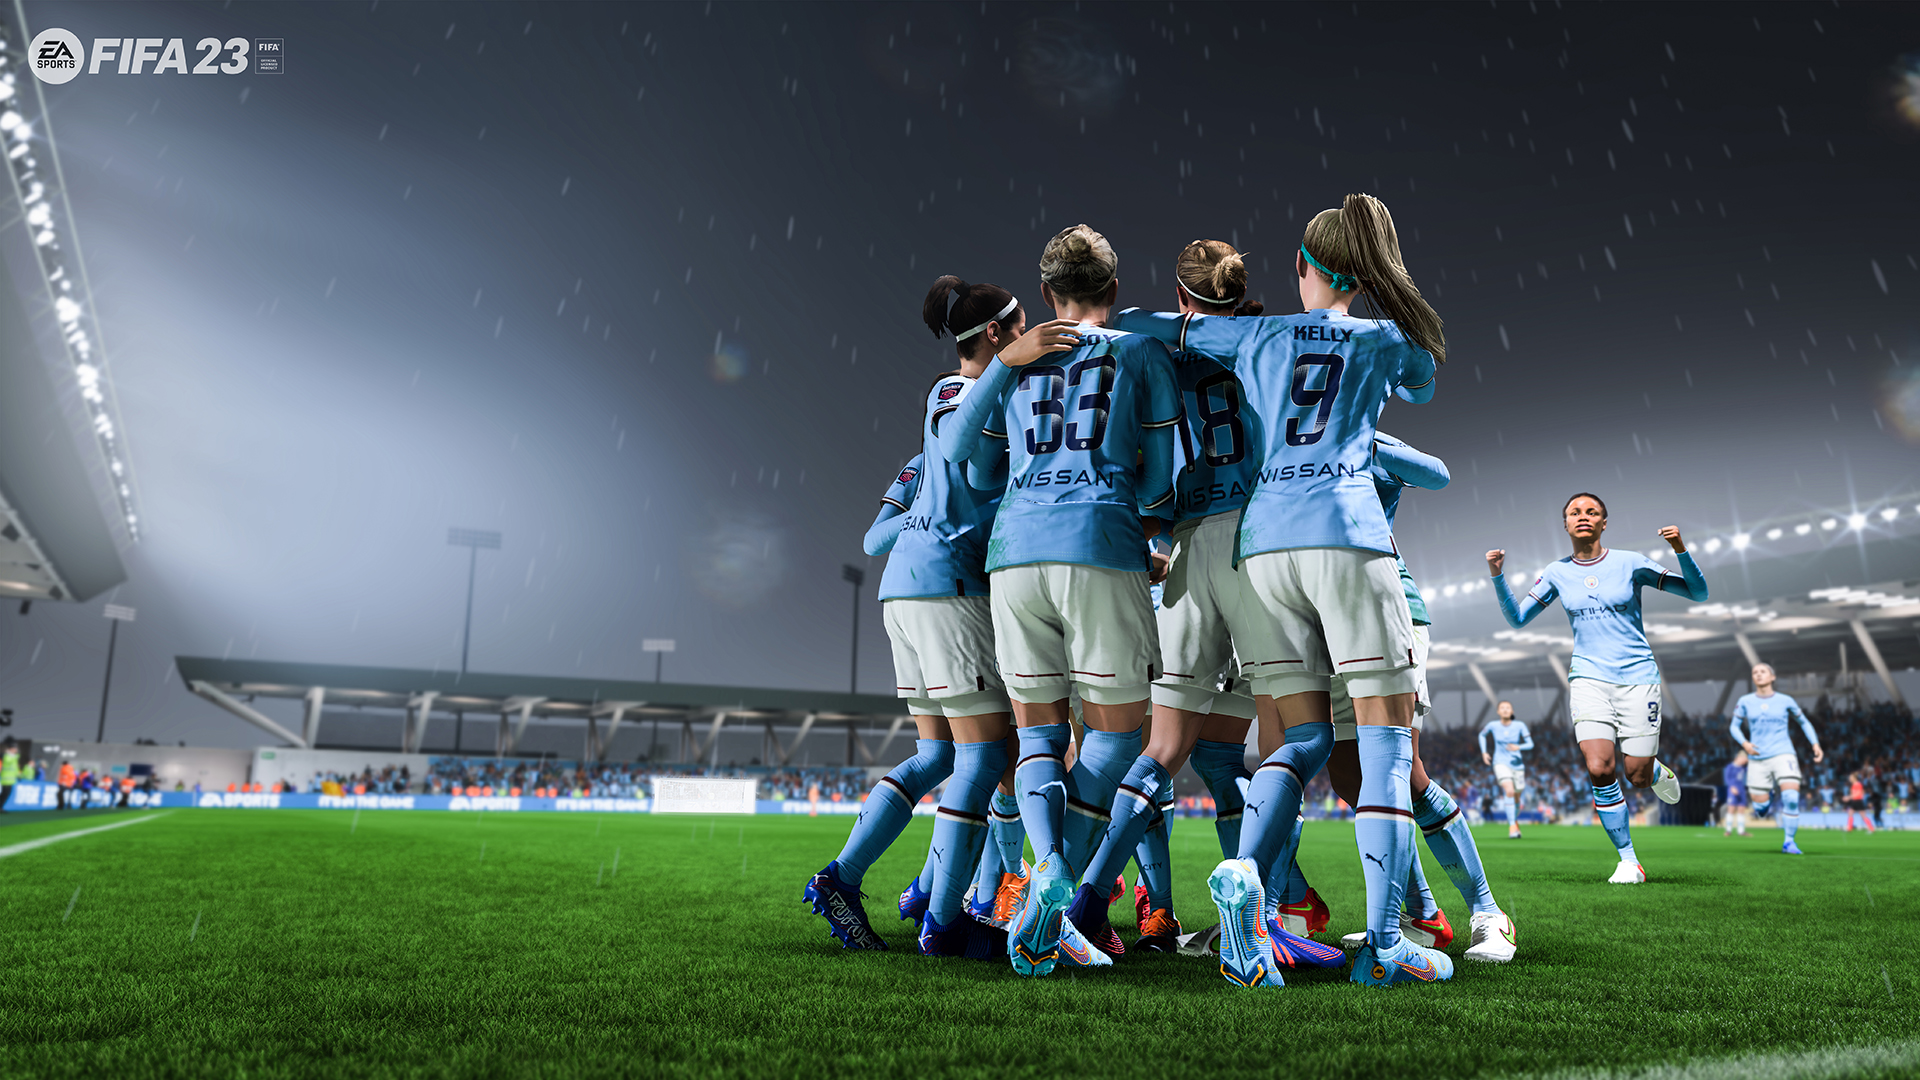 FIFA 23 Trailer, Screenshots, HyperMotion Features & More Revealed